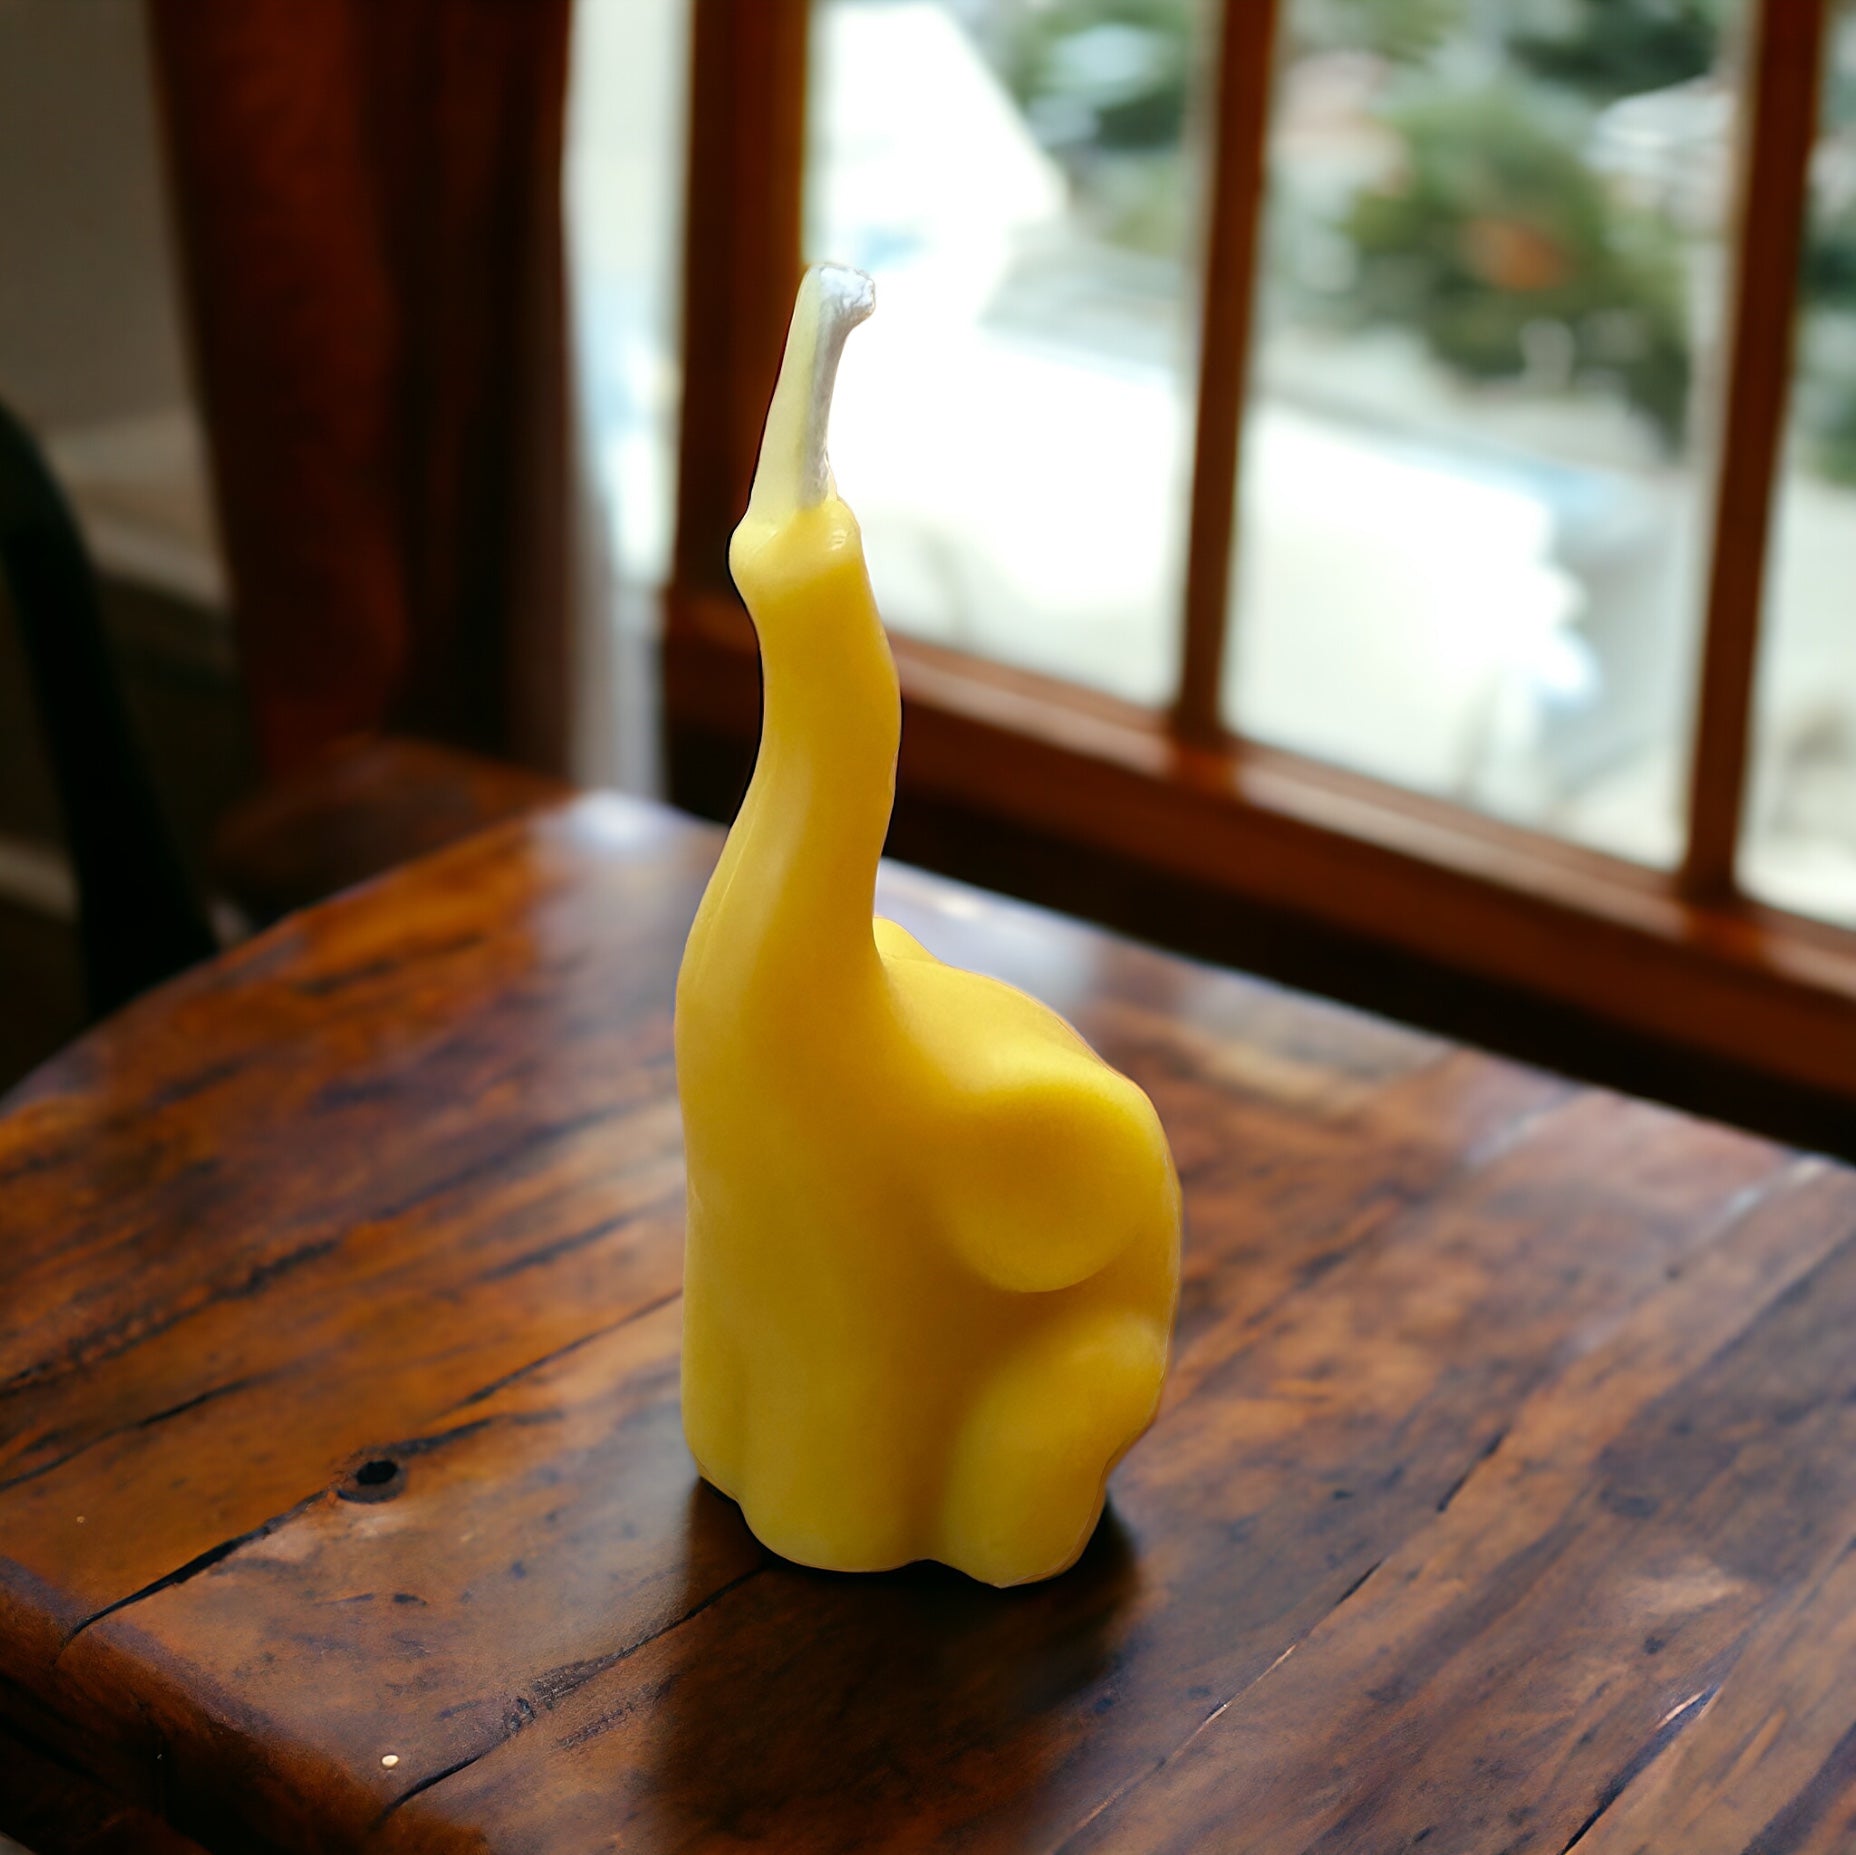 Small beeswax candle in the shape of an elephant on a wooden surface in front of a window